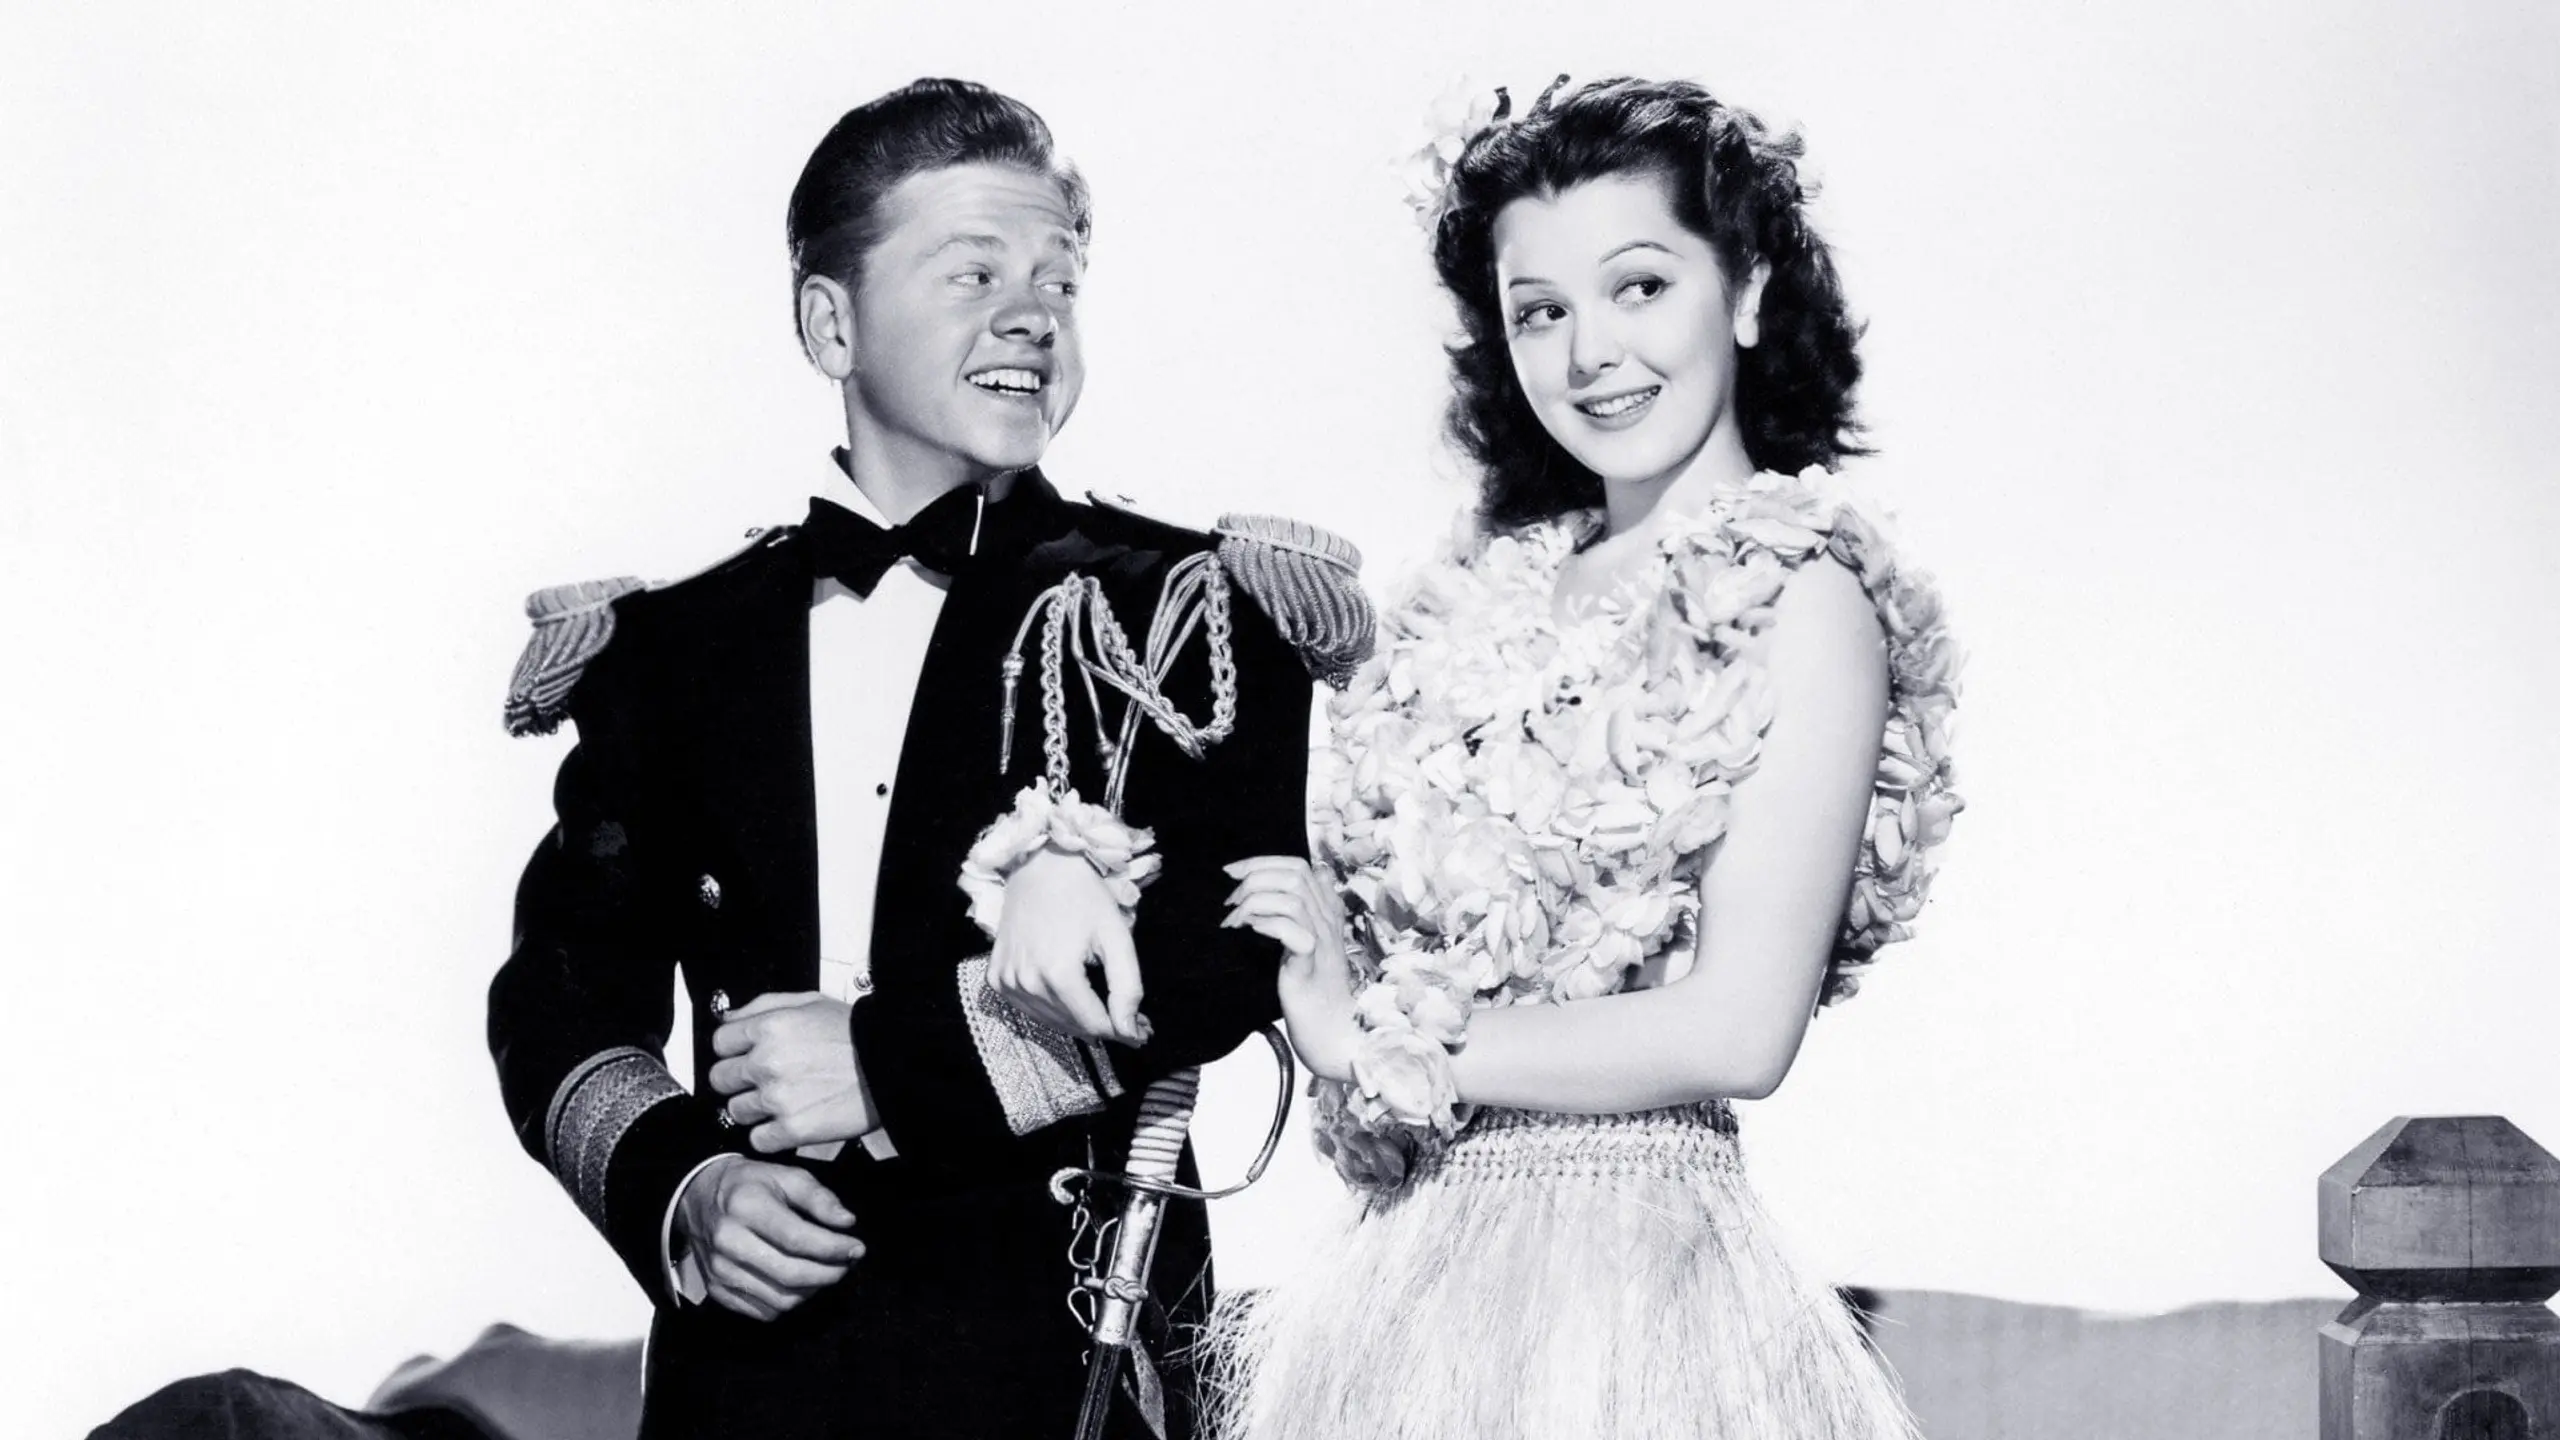 Andy Hardy Gets Spring Fever